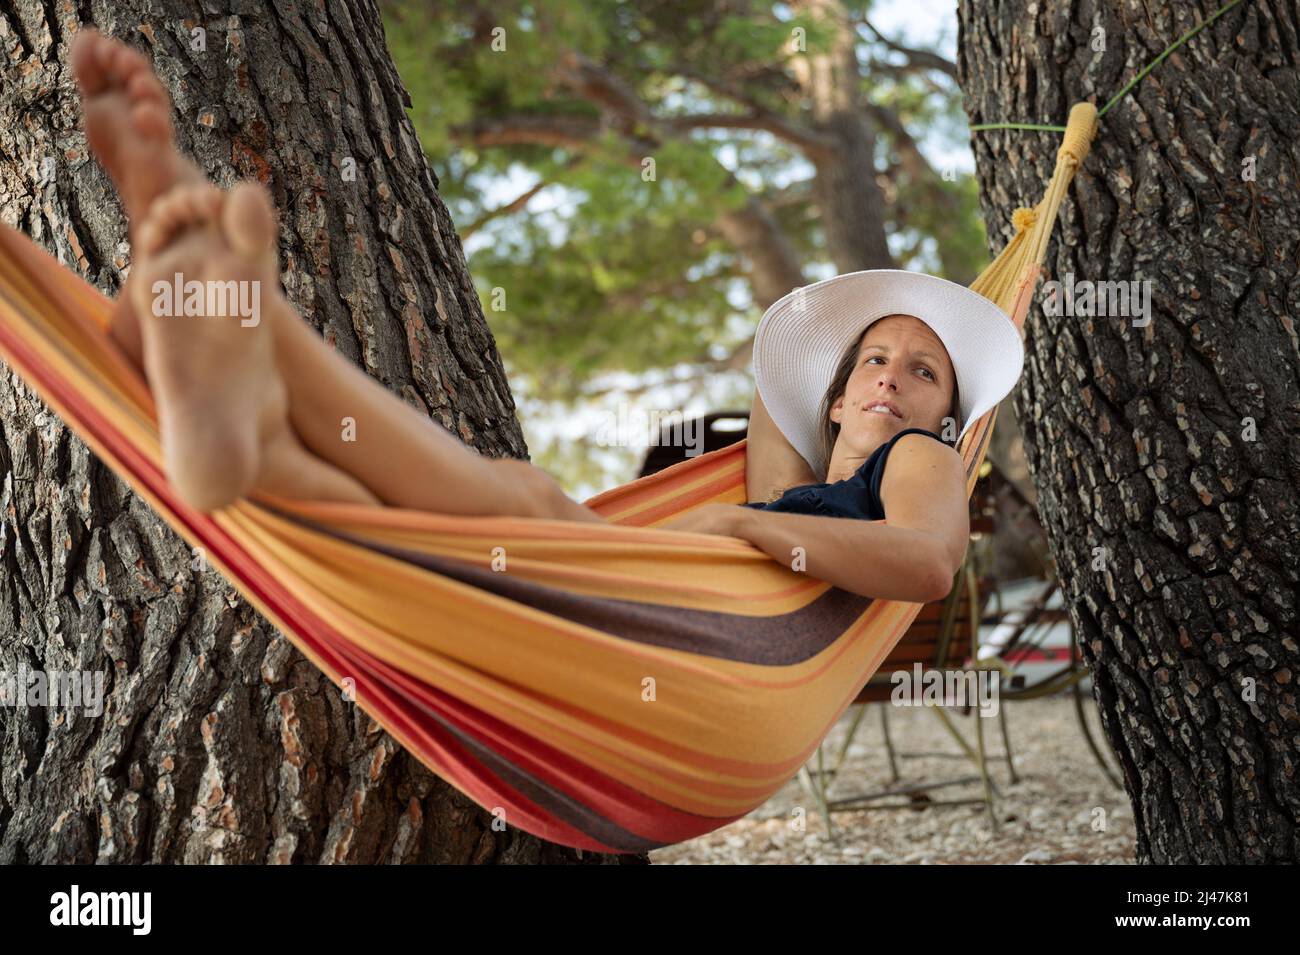 Sun tanned young woman lying in a hammock between pine trees in a summer holiday resort. Stock Photo